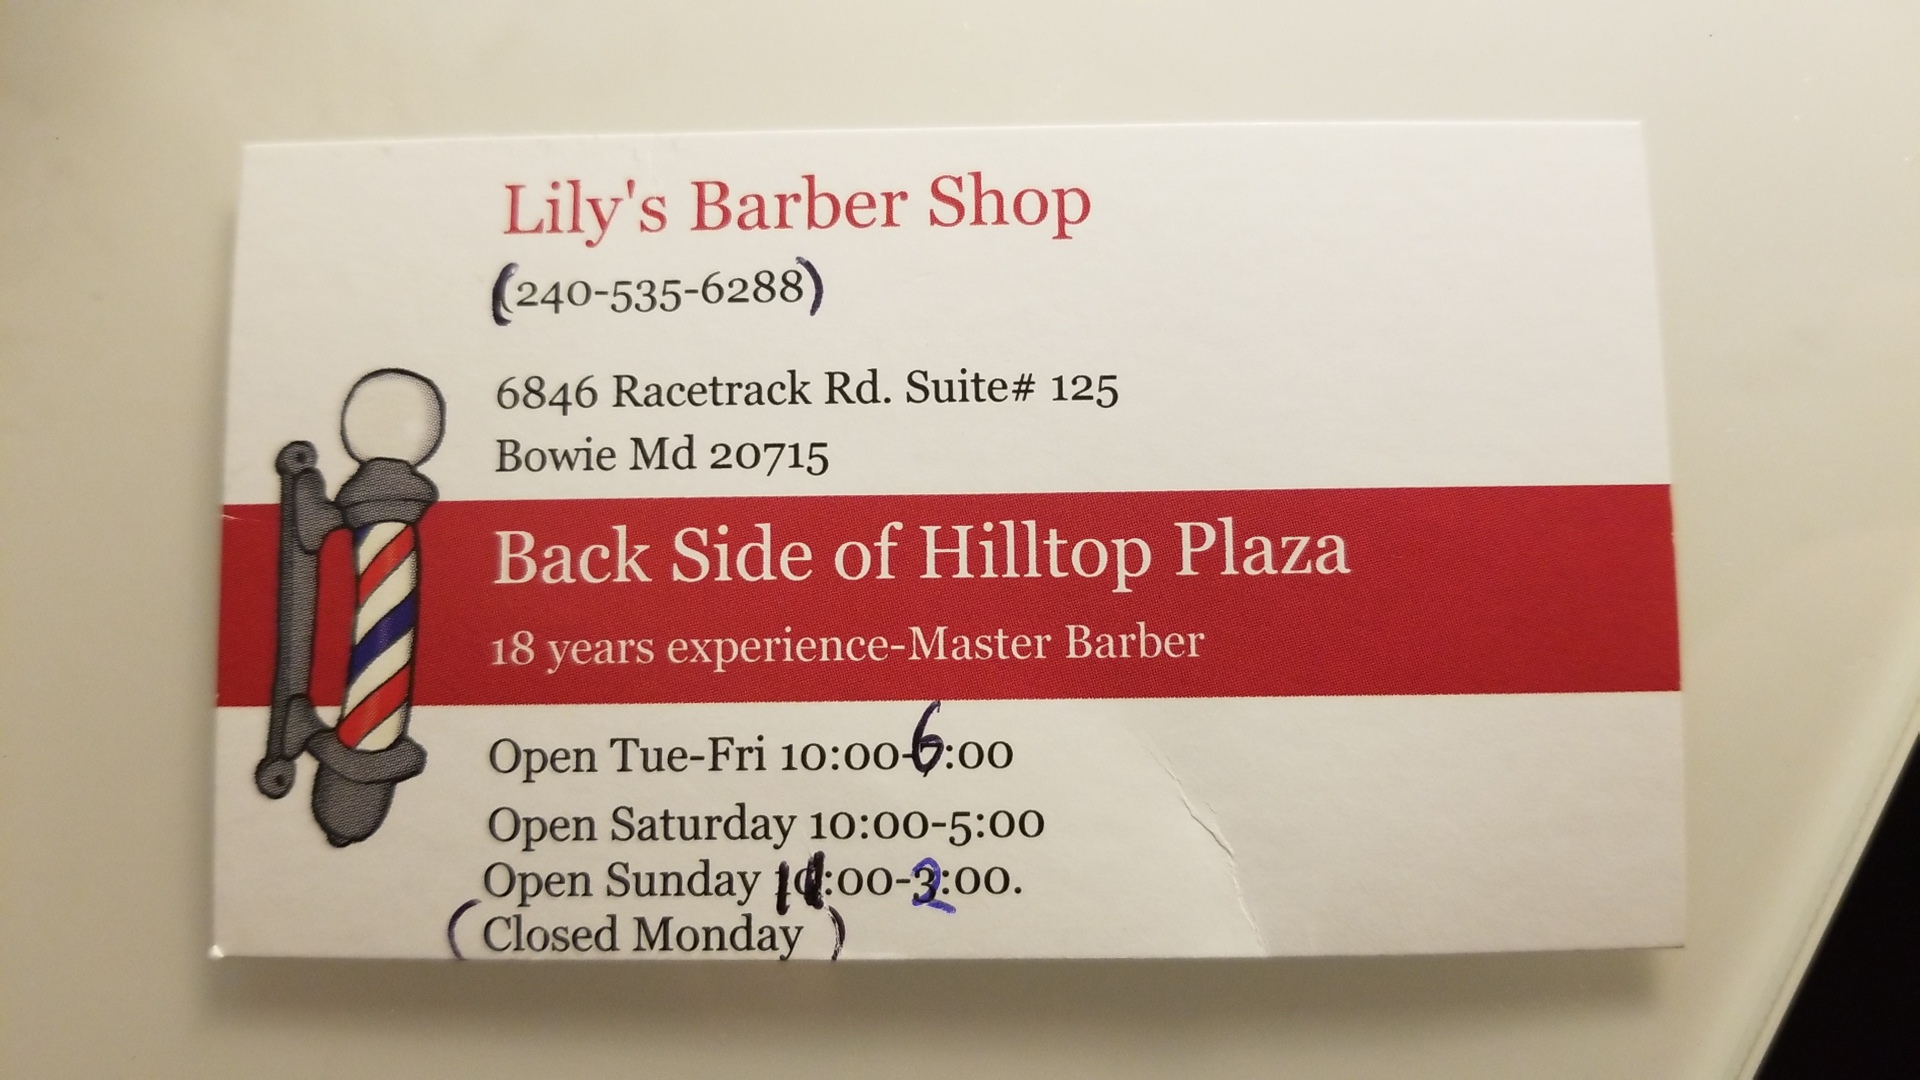 LiLy's Barber Shop